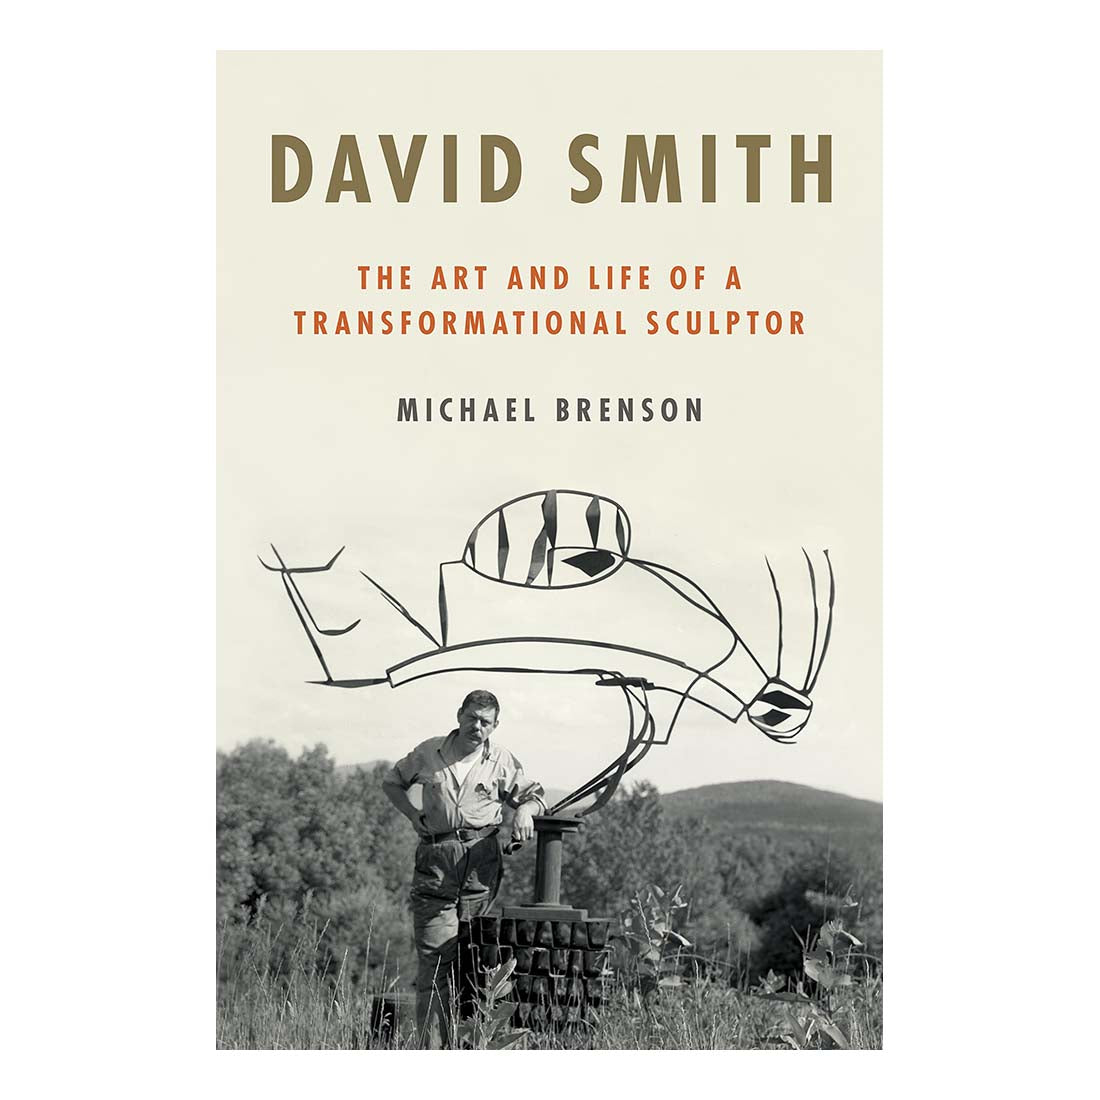 David Smith: The Art and Life of a Transformational Sculptor